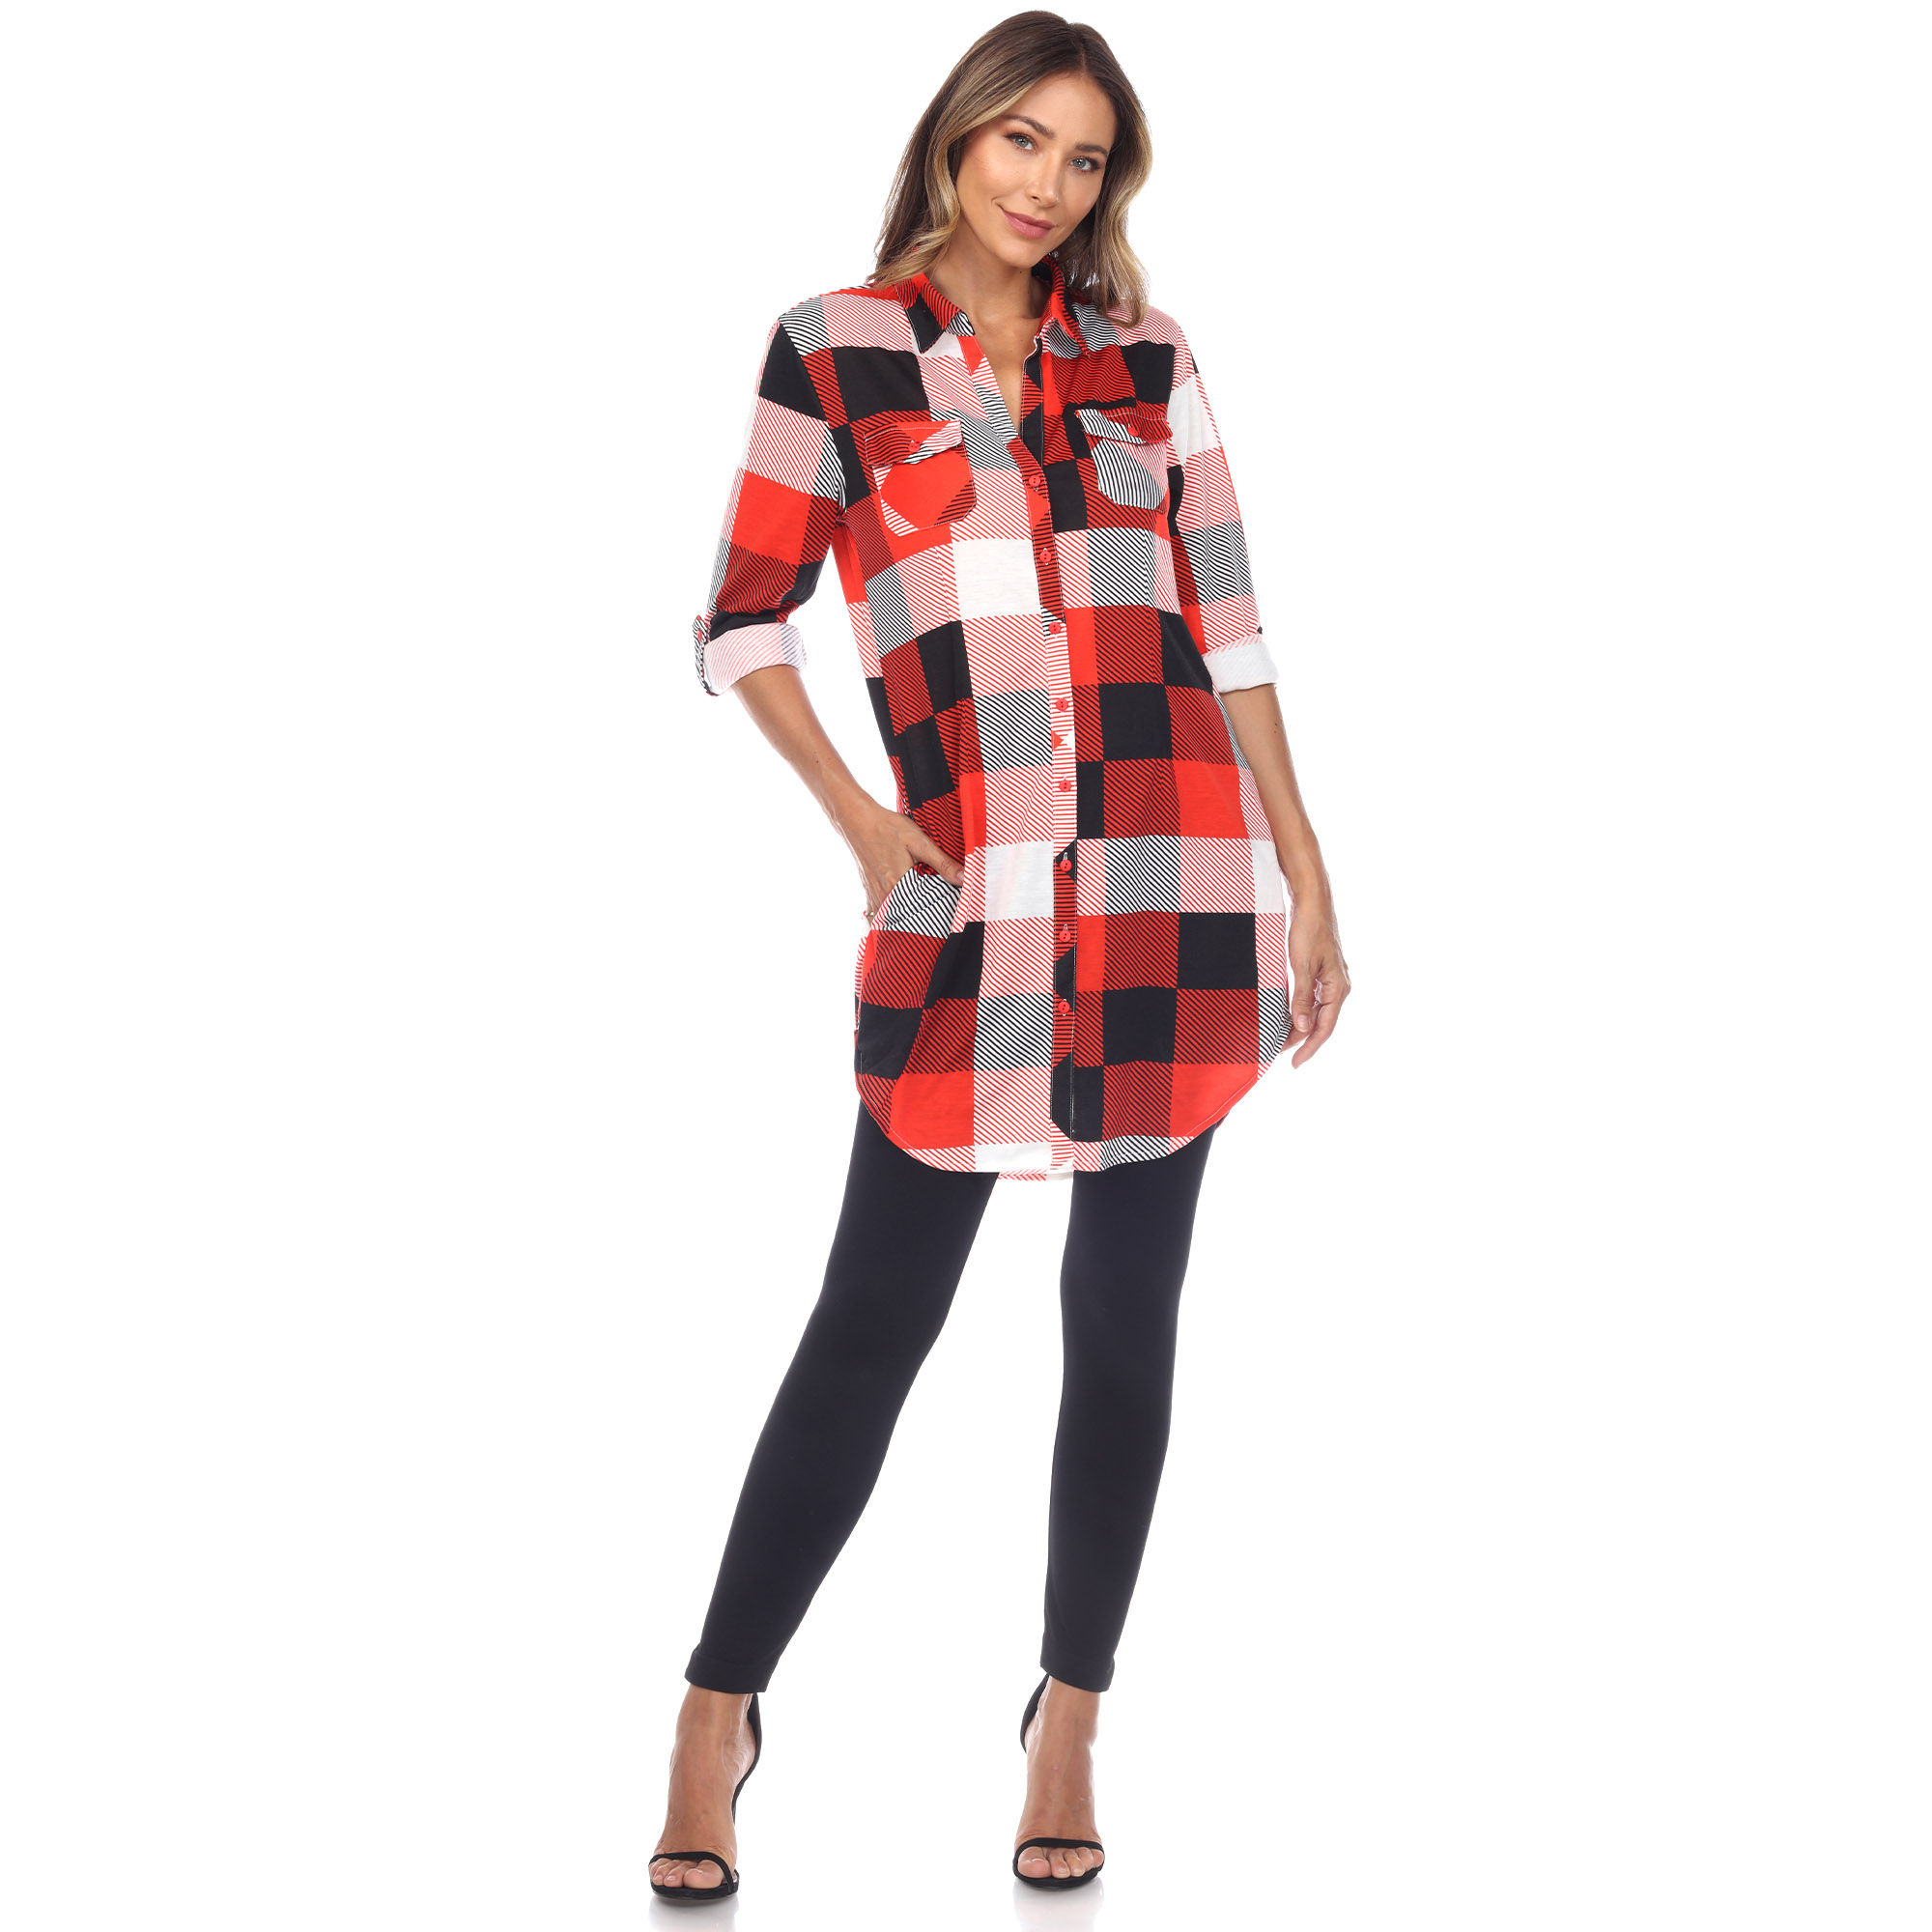 White Mark Women's Stretchy Buffalo Plaid Tunic Top - Blue/Brown, Large